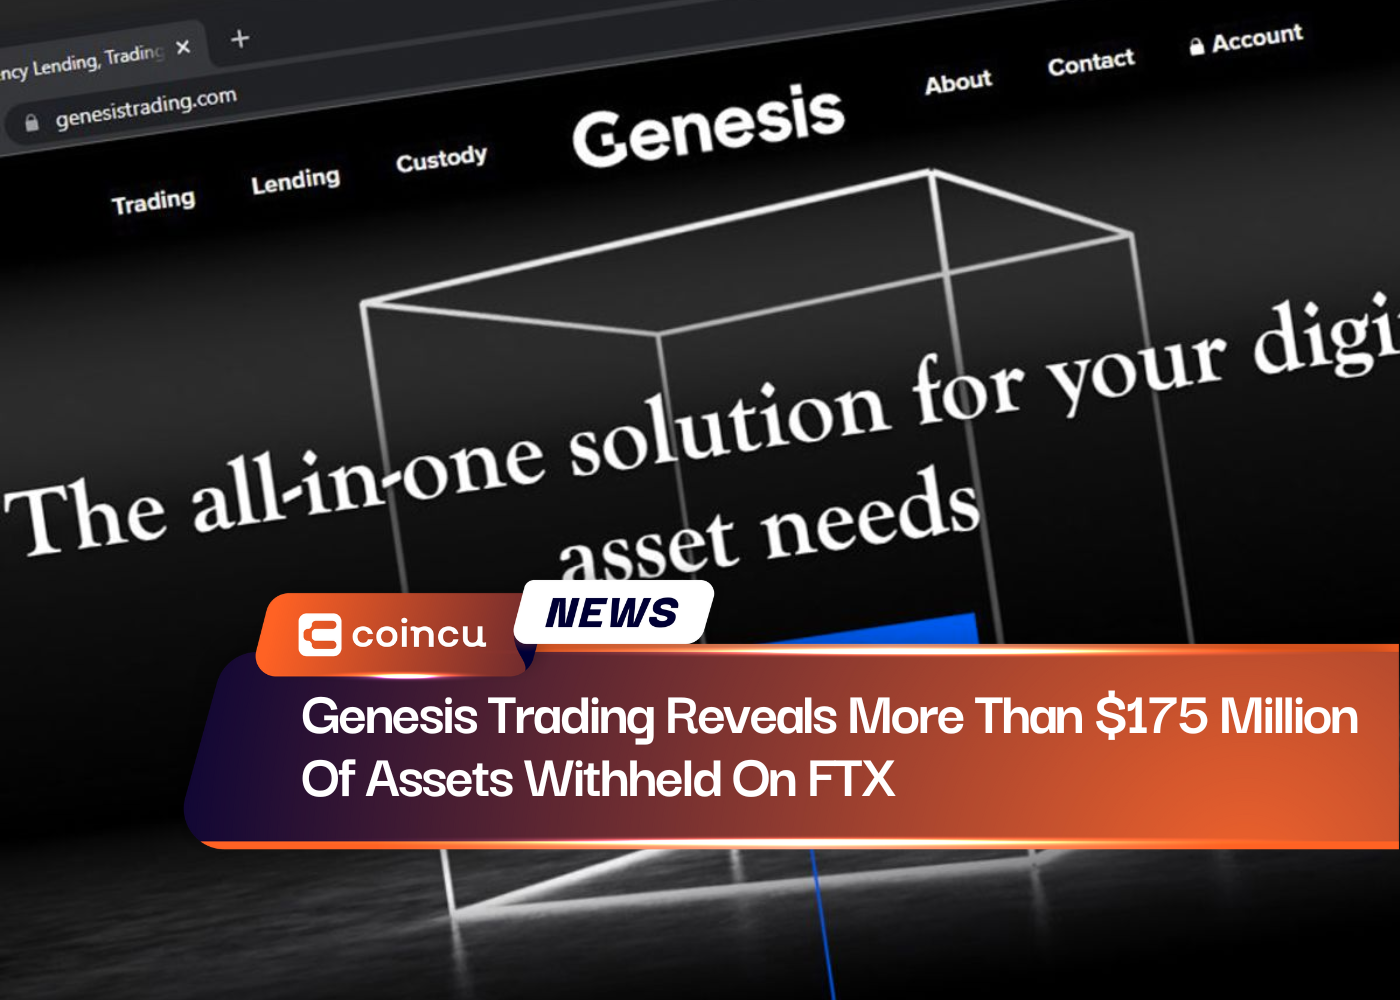 Genesis Trading Reveals More Than $175 Million Of Assets Withheld On FTX